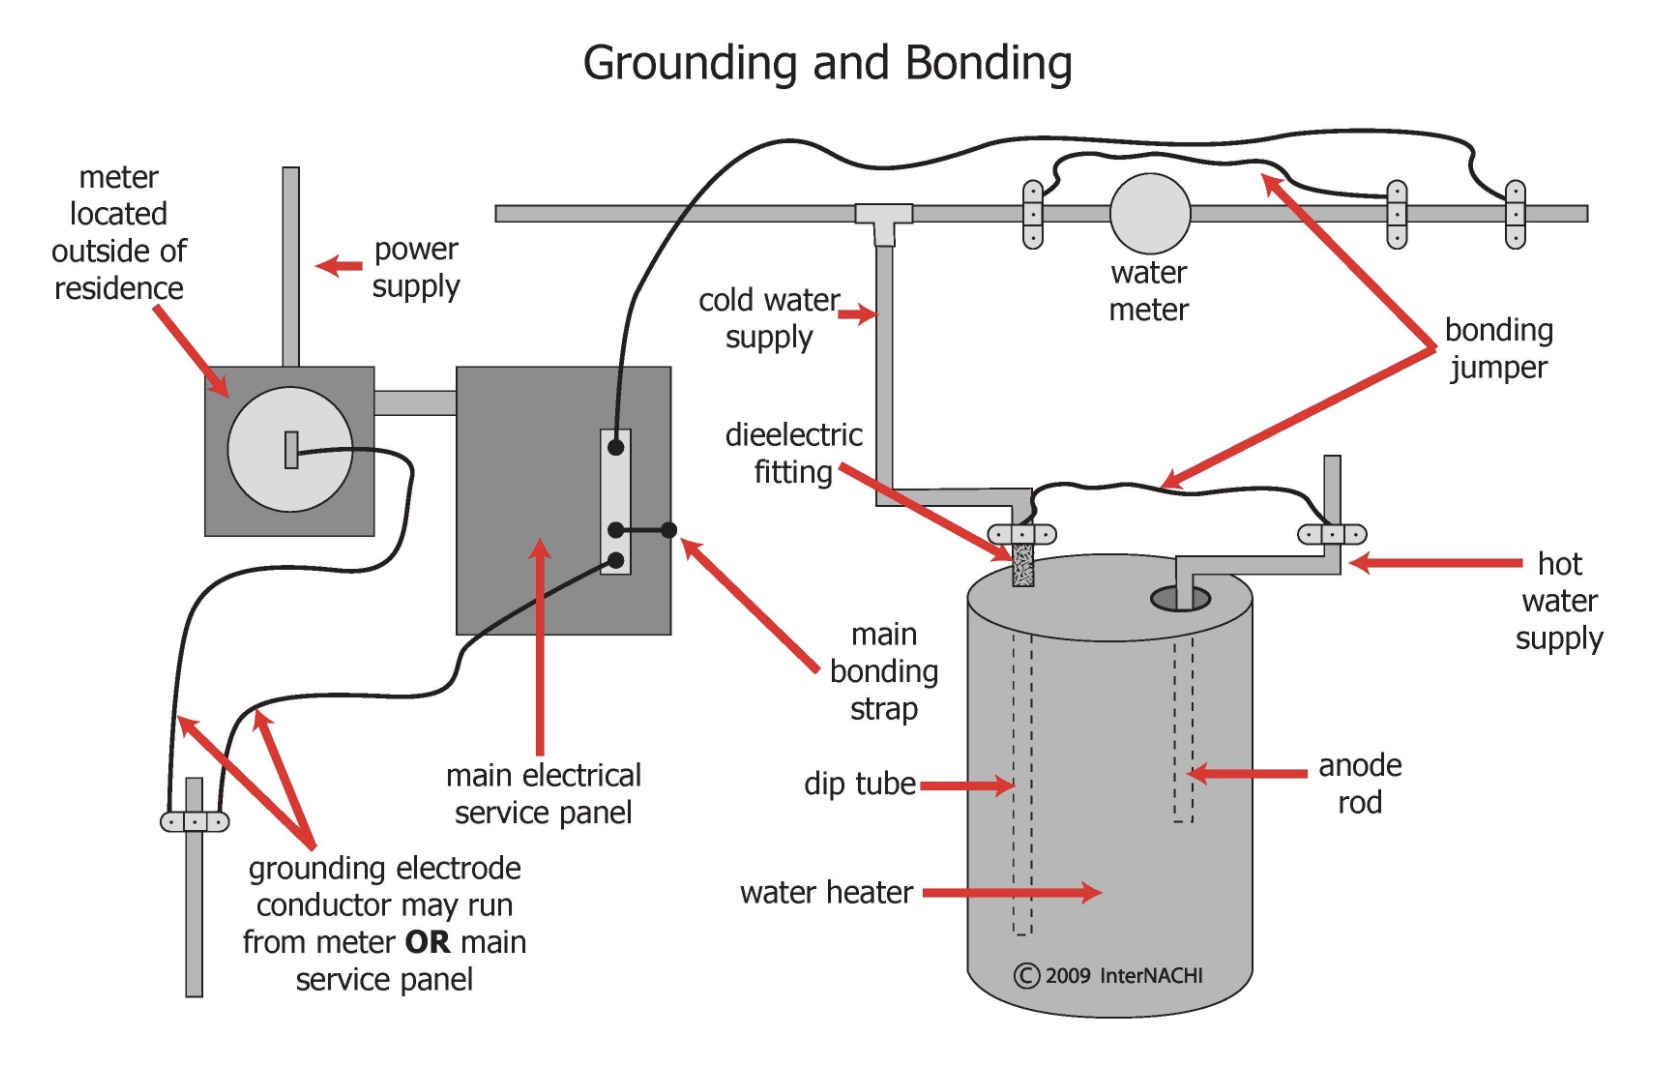 Wiring Diagram For Ground